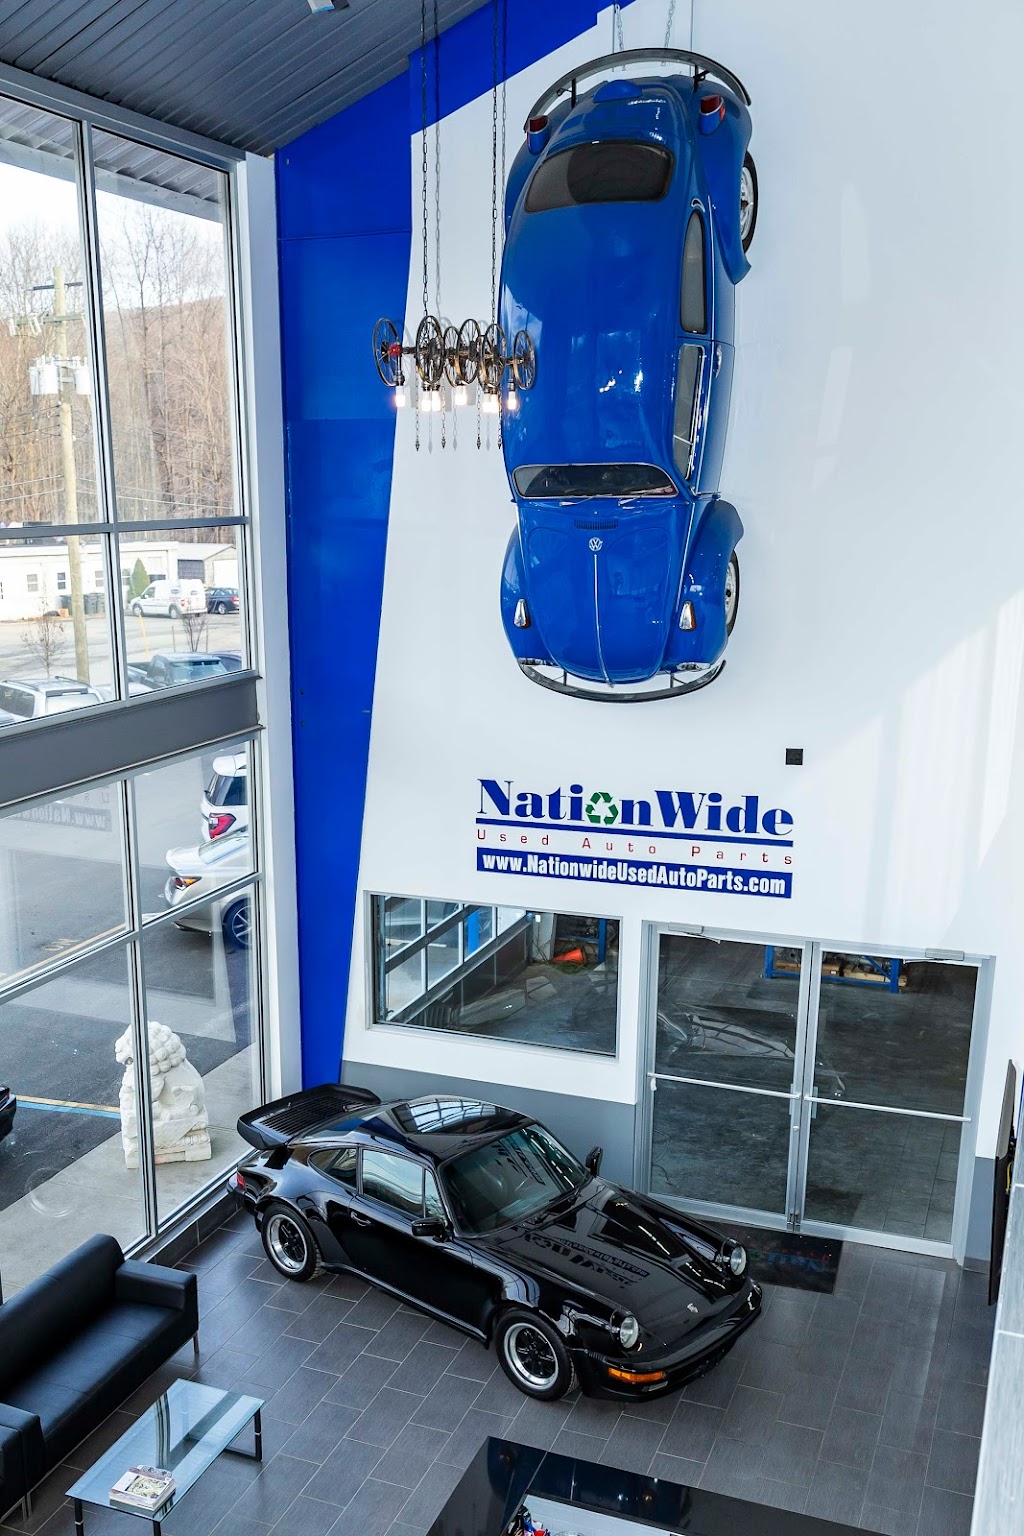 NationWide Used Auto Parts | 8 Laura Ln, Central Valley, NY 10917 | Phone: (877) 909-1010